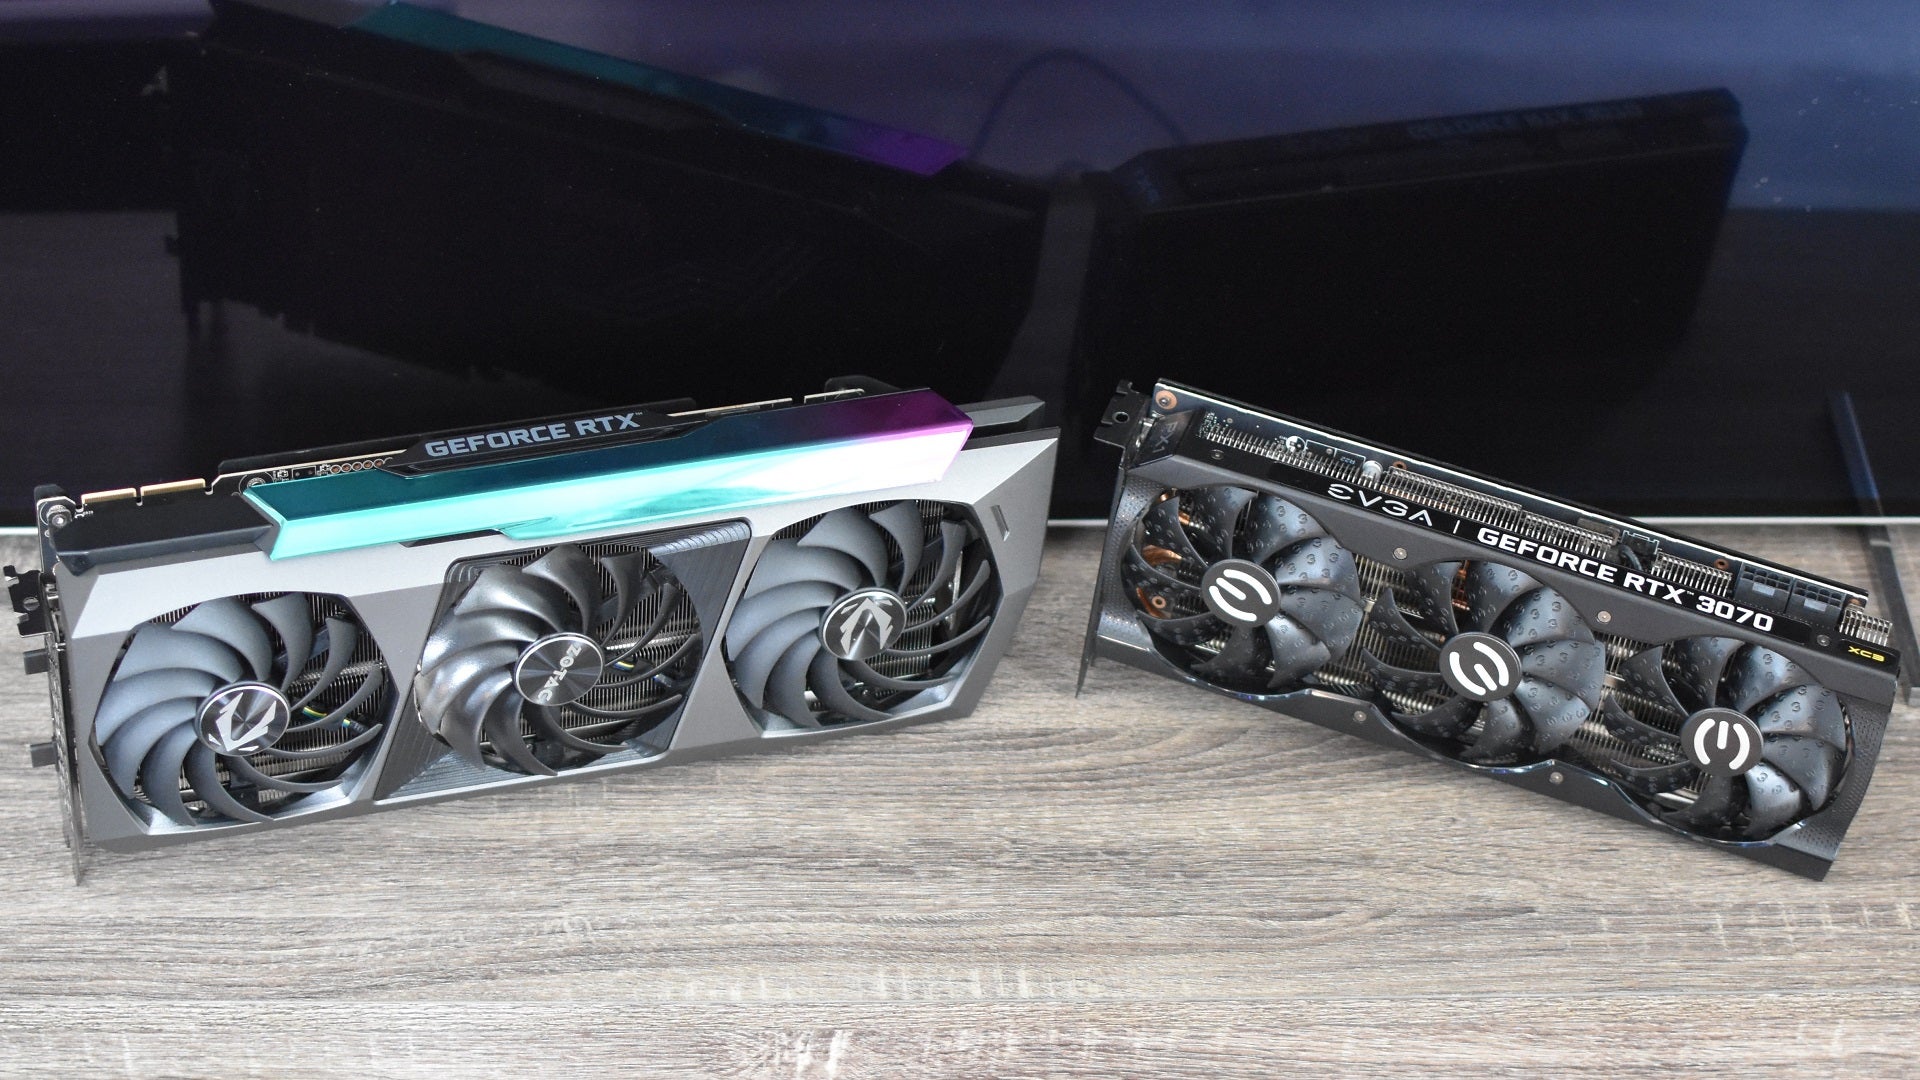 The Zotac GeForce RTX 3090 Ti AMP Extreme Holo graphics card next to an RTX 3070, showing the size difference between the two.